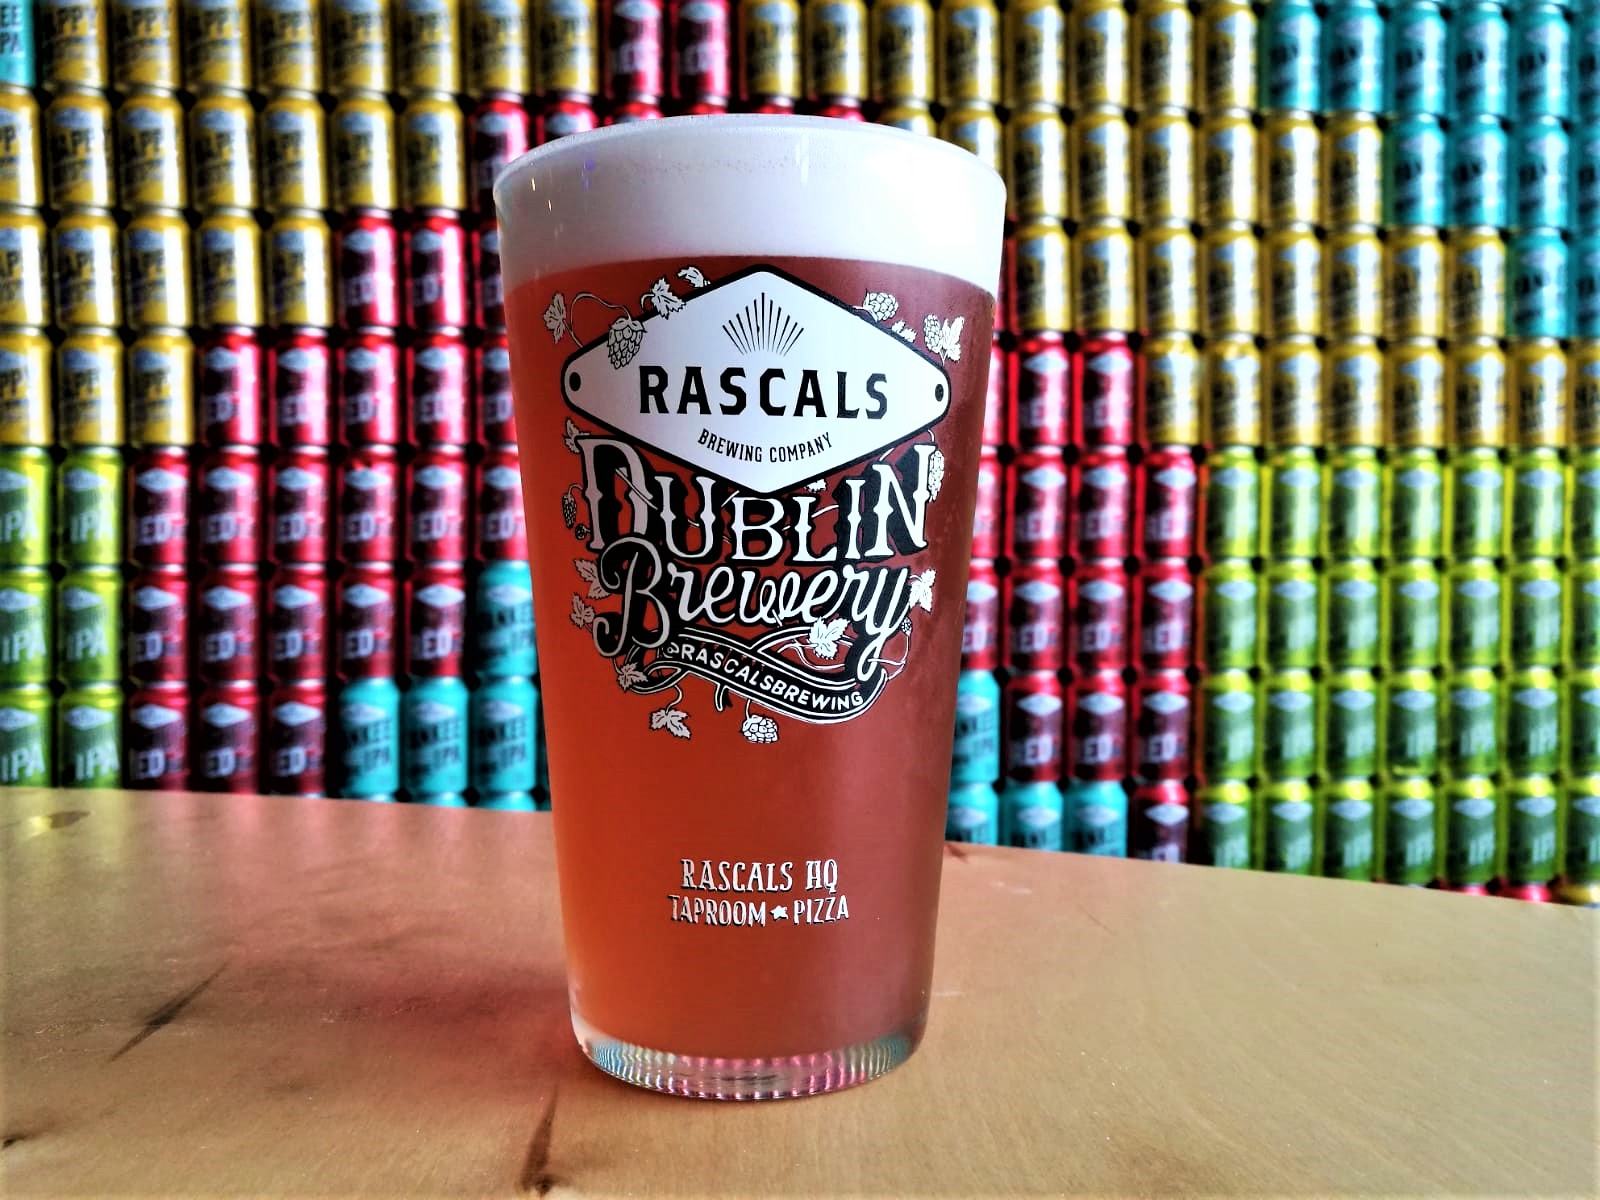 A pint of fresh Irish craft beer from Rascals Brewing Company